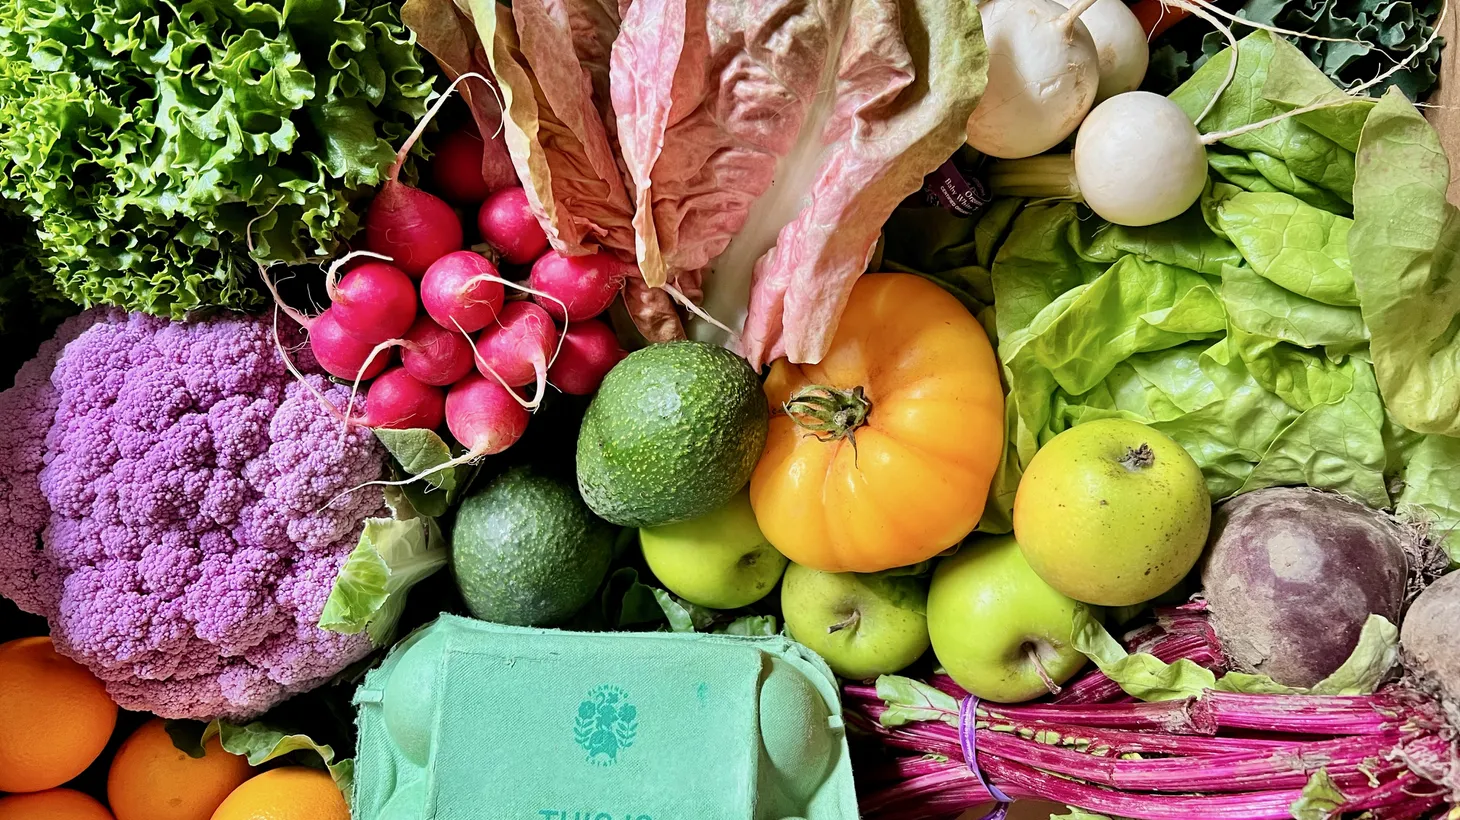 These colorful vegetables and fruits are from a Flamingo Estate produce box.